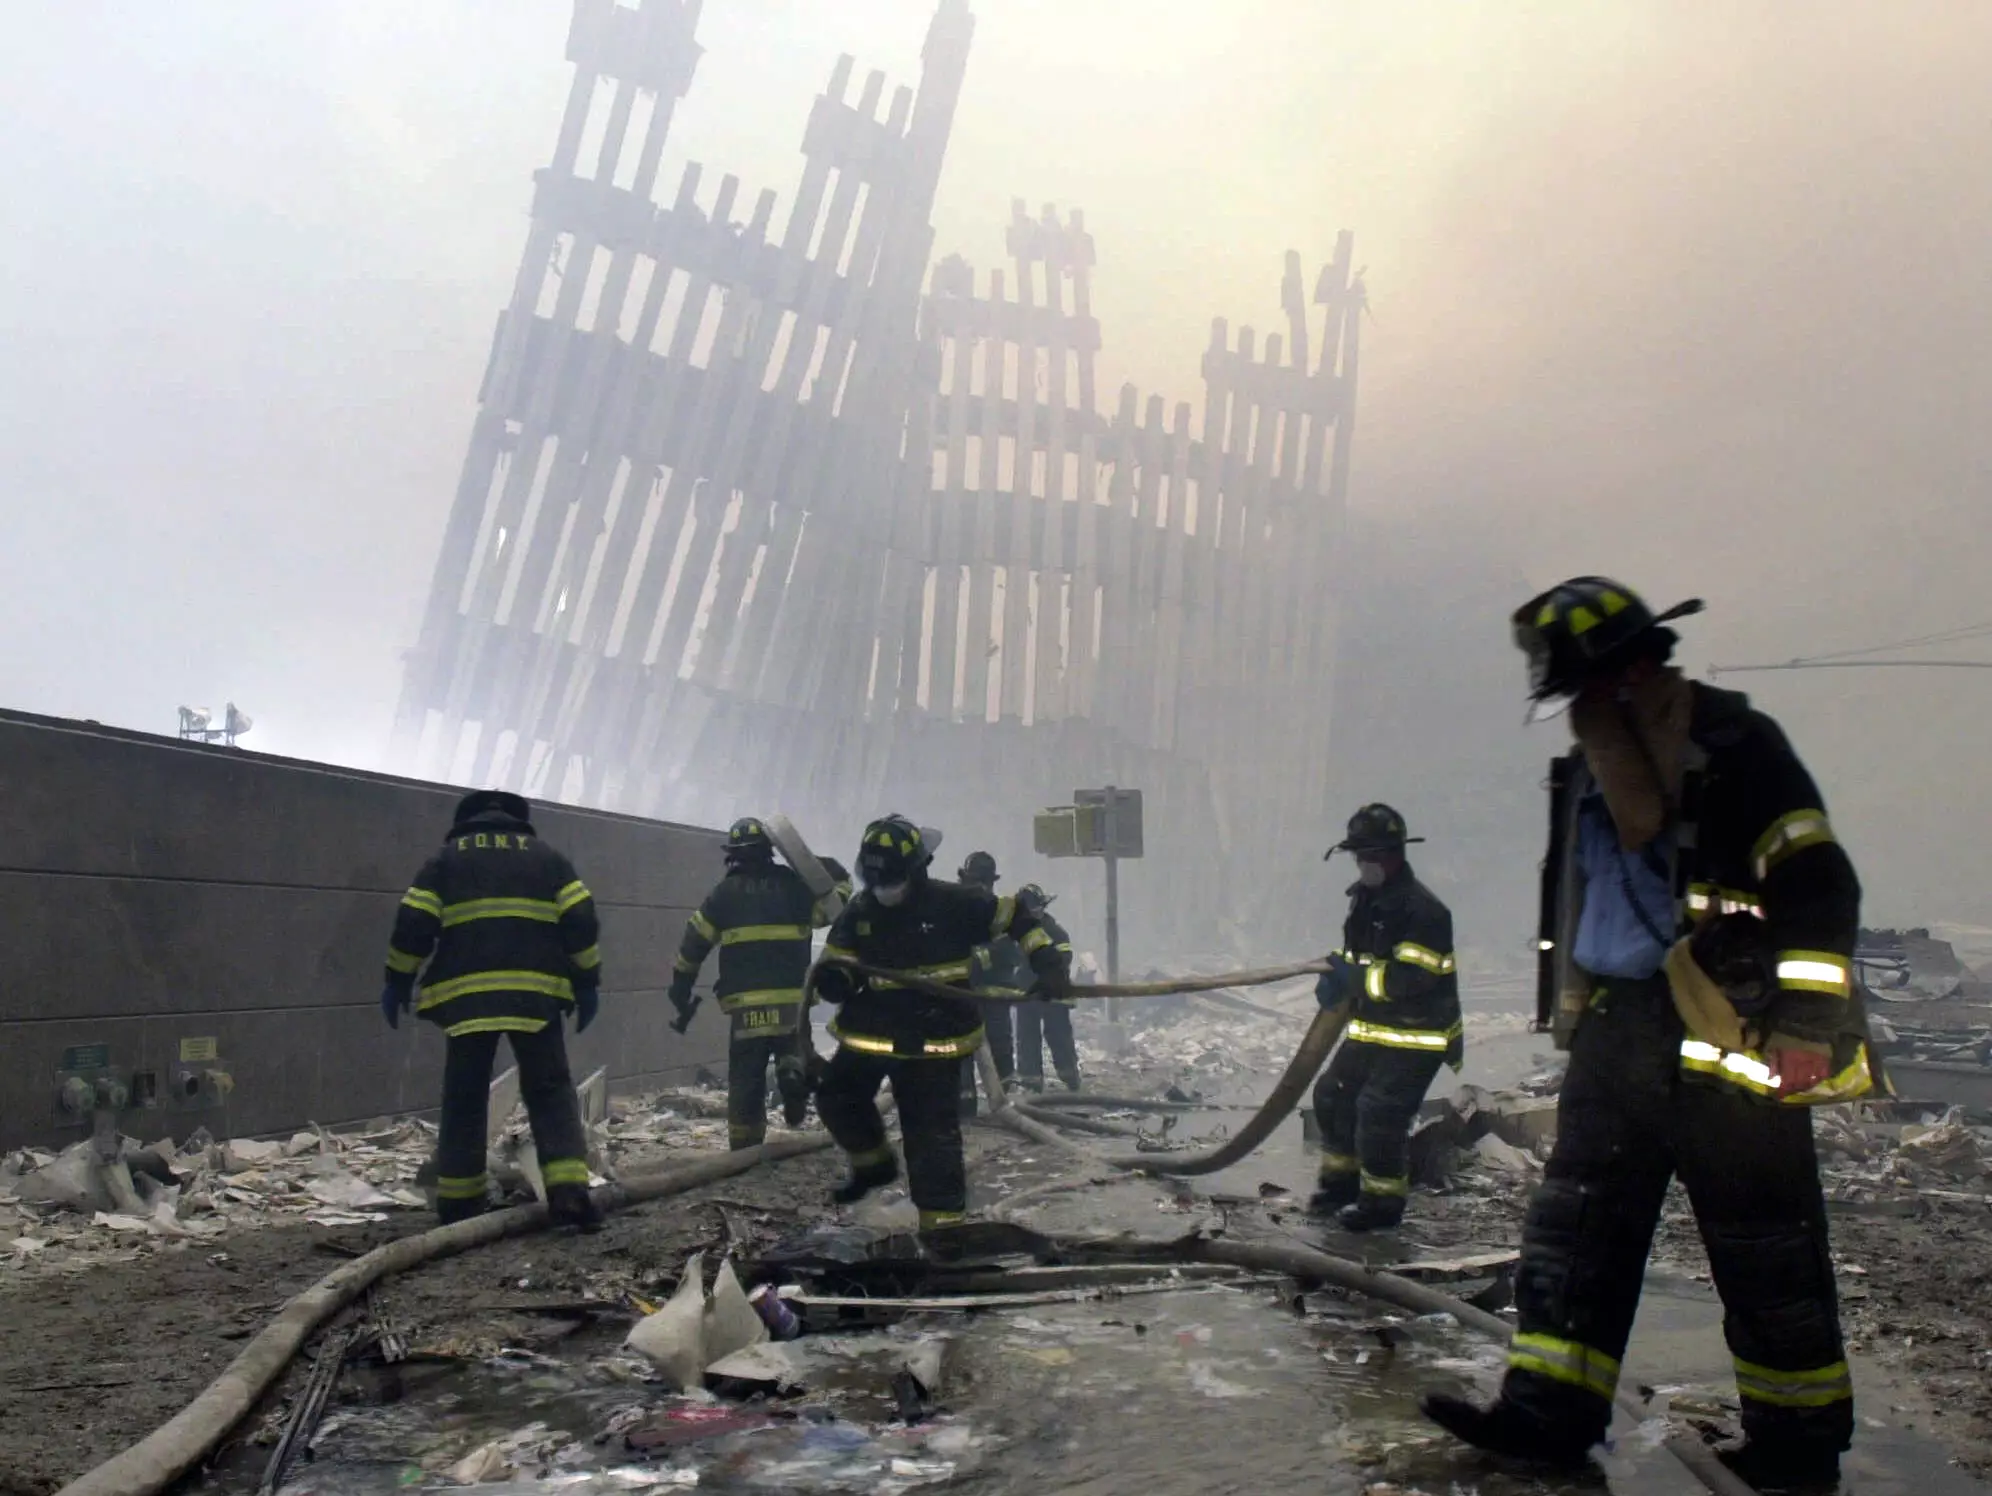 Firefighters and volunteers searching for survivors in the aftermath of the collapse of the twin towers.